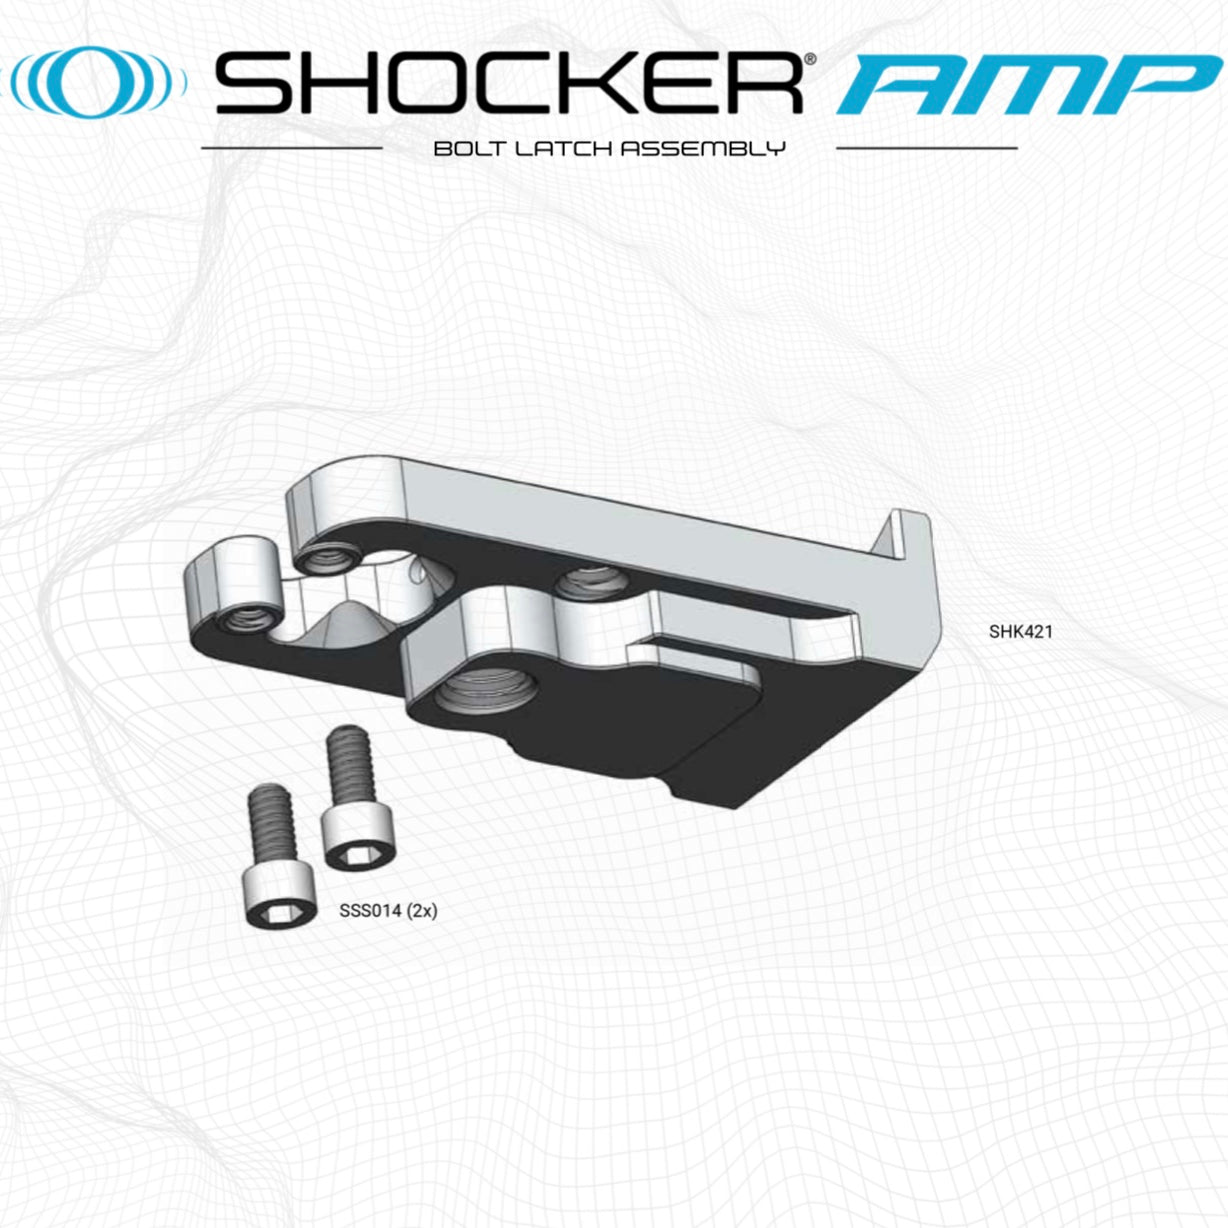 SP Shocker Amp Bolt Latch Assembly Parts List - Pick the Part You Need!